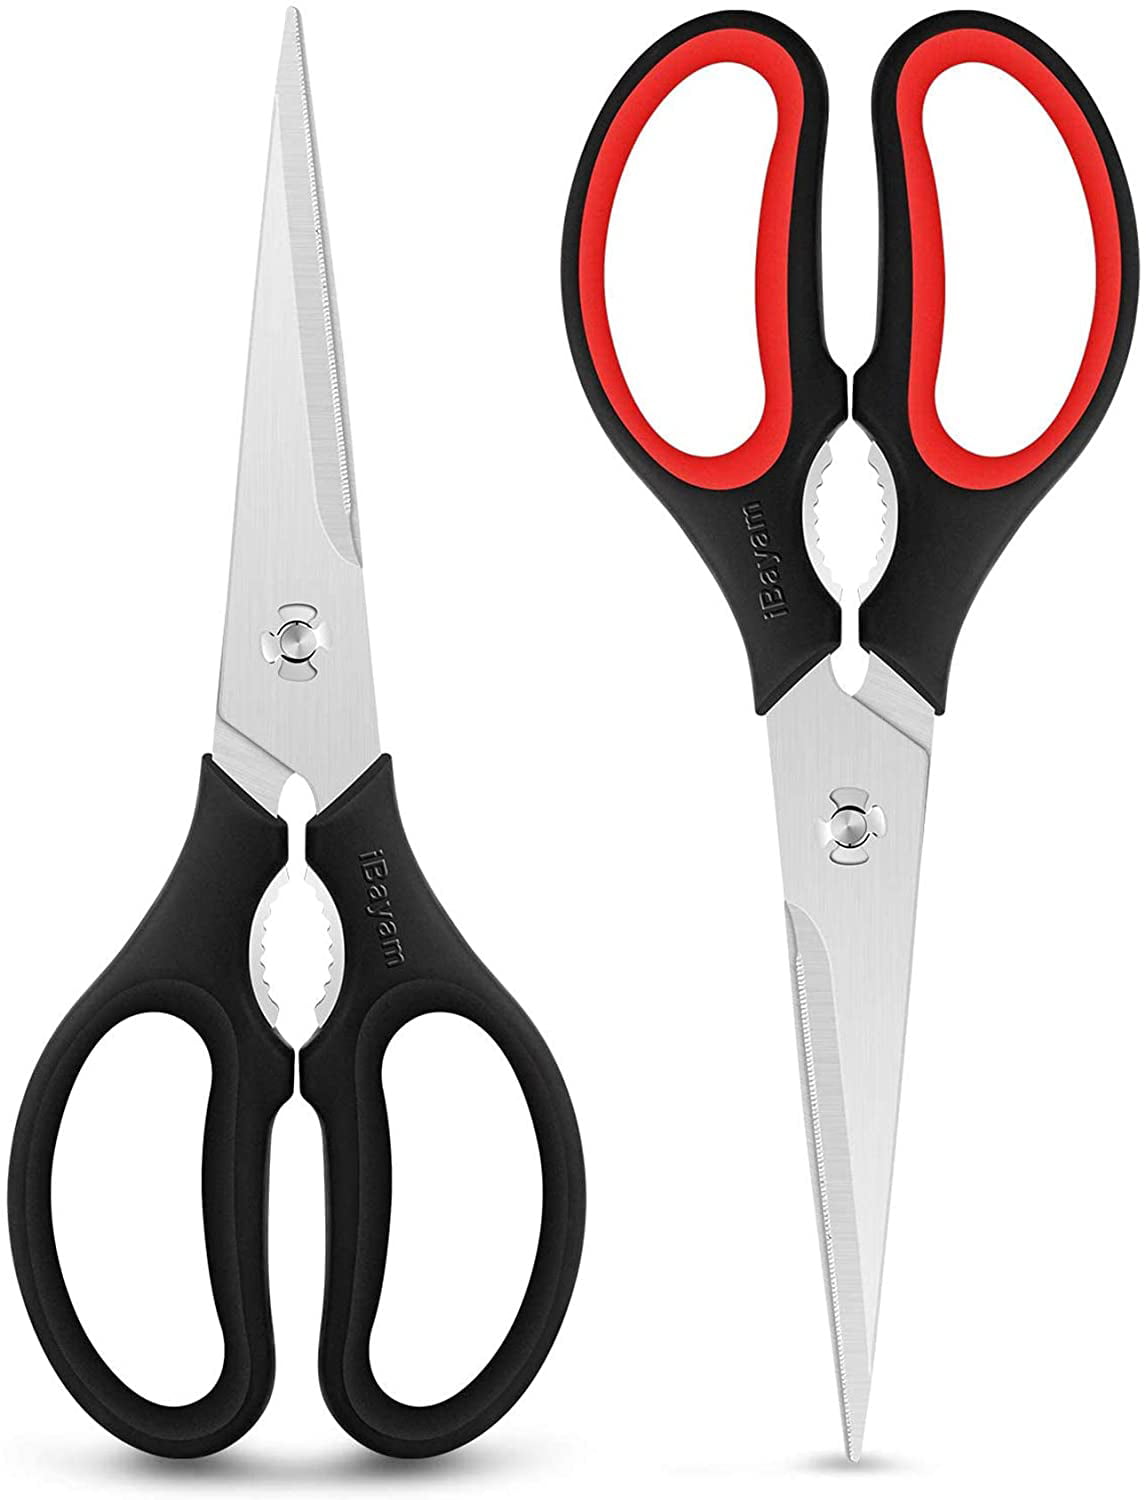 Kitchen Scissors Super Sharp high quality Household Multi Purpose Meat Poultry 